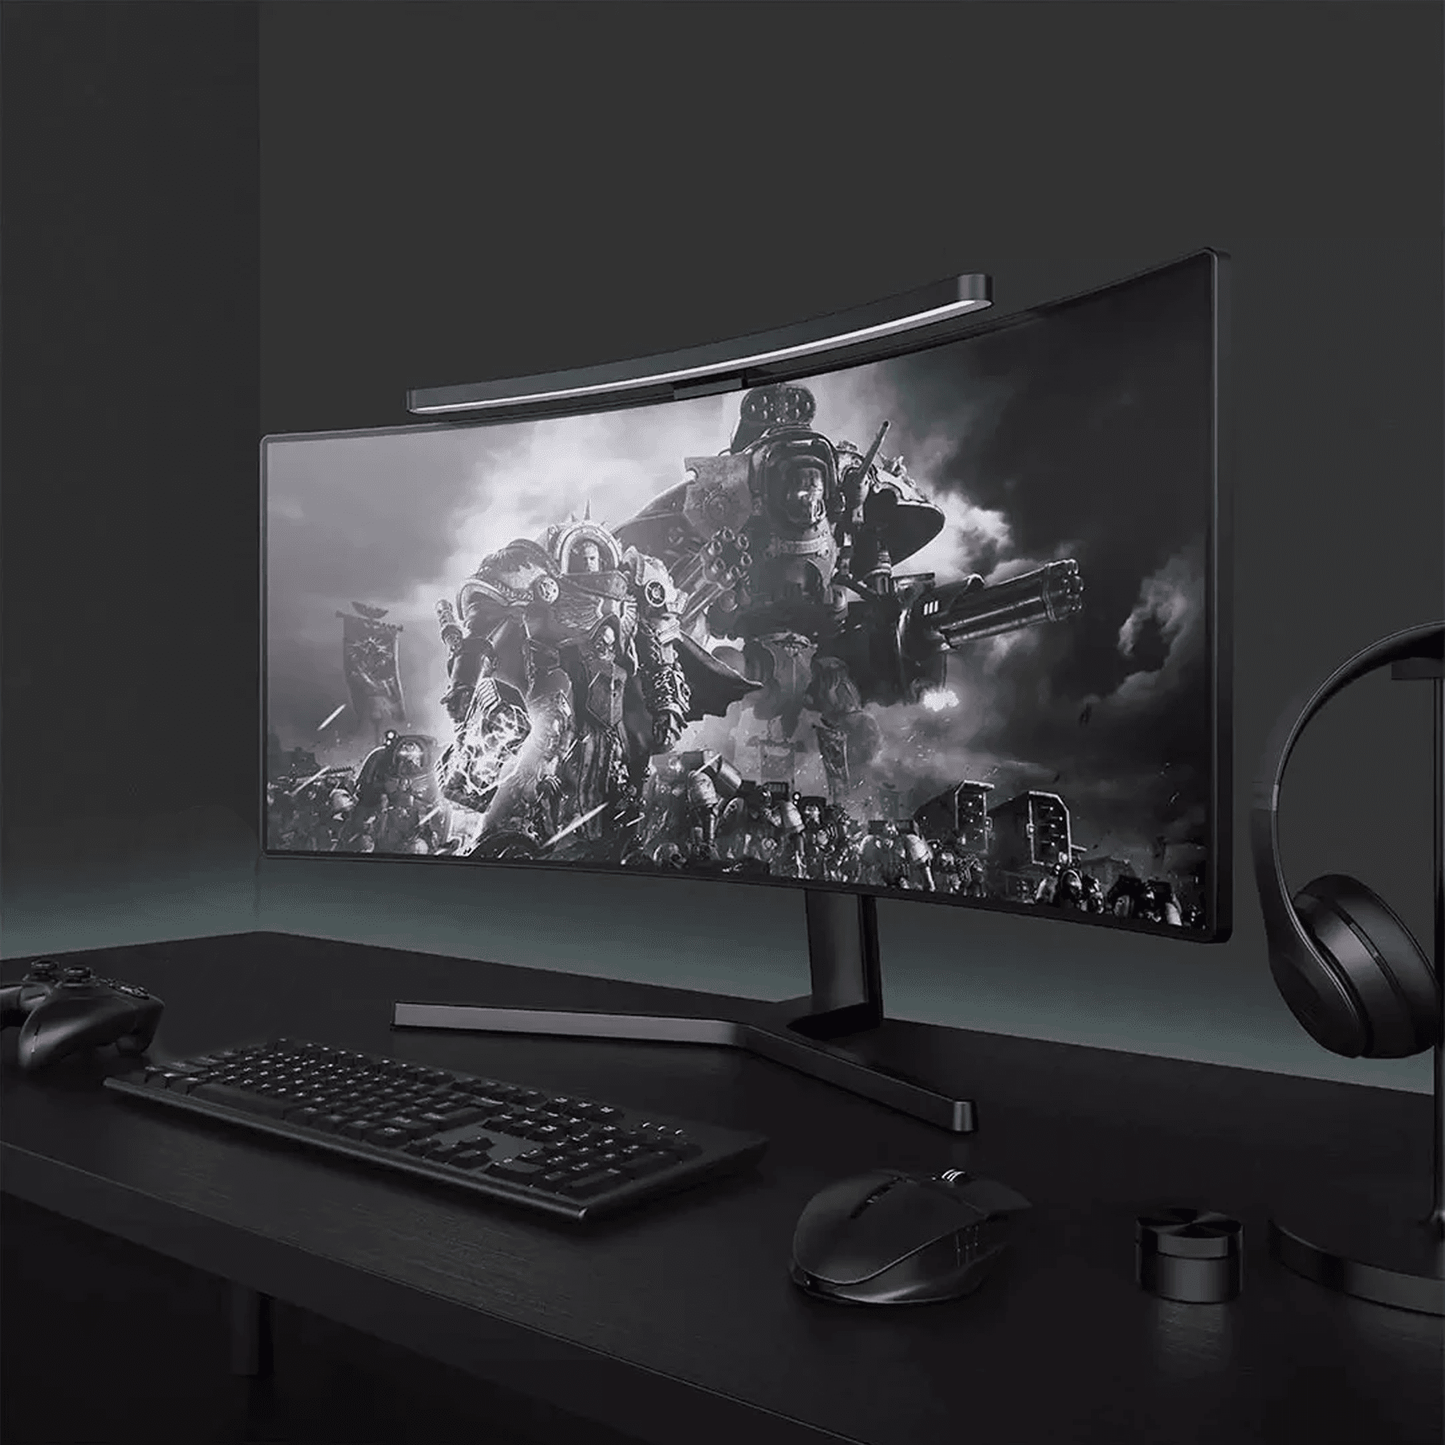 Mock image of our LYMAX Curved Light Bar on top of a curved display in an all black and grey environment. The best curved light bar for any home office and gaming setup.